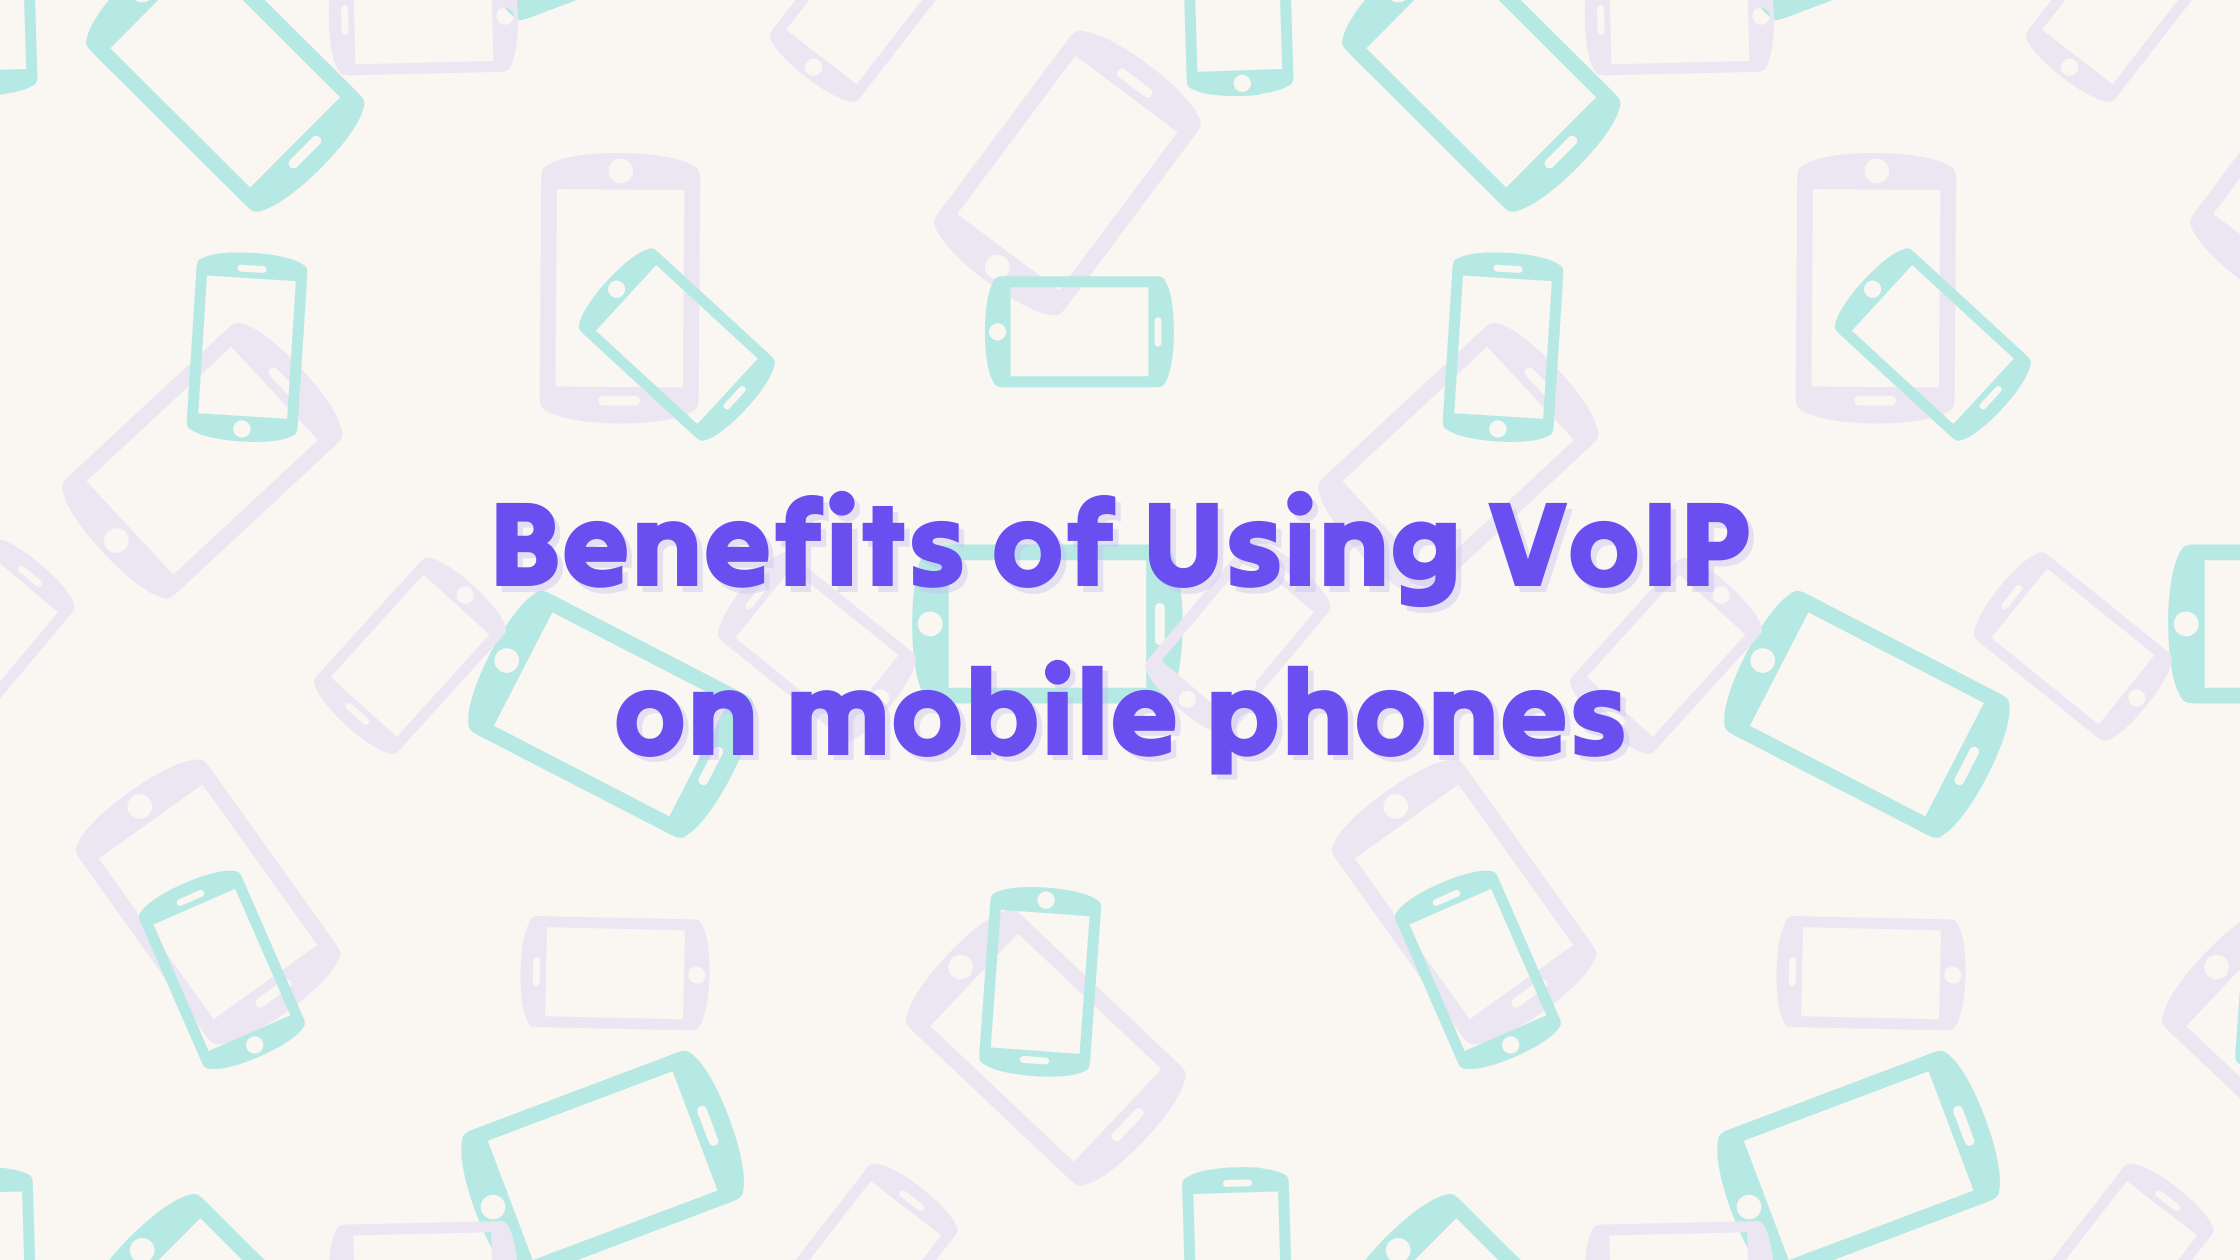 Title of 'Benefits of Using VoIP on Mobile Phones' with a repeating graphic of smartphones in the background